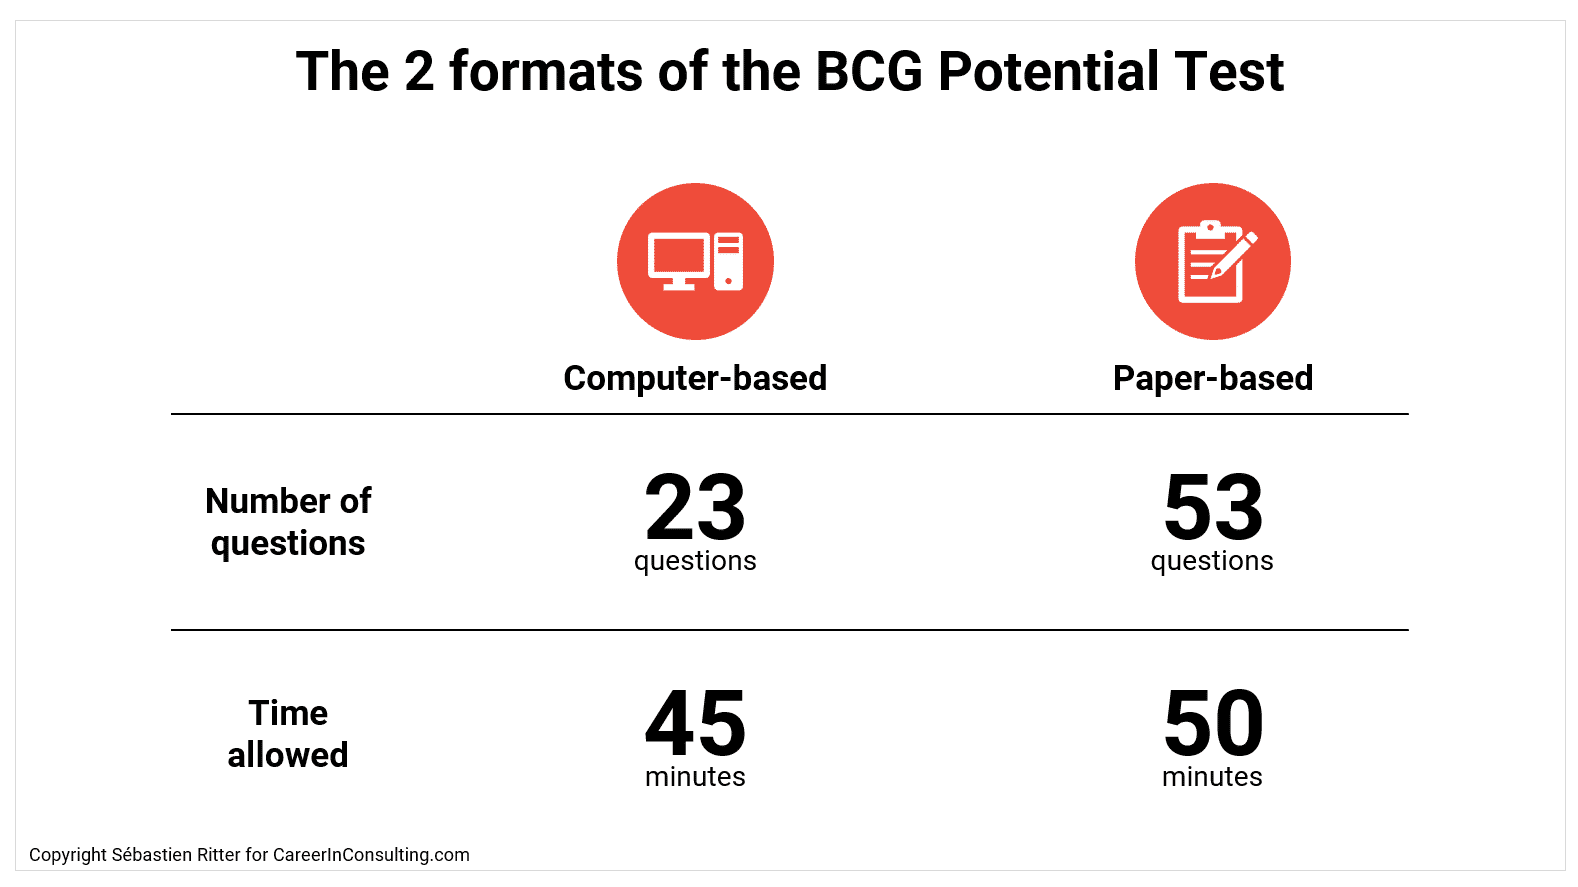 The 2 formats of the BCG Potential Test